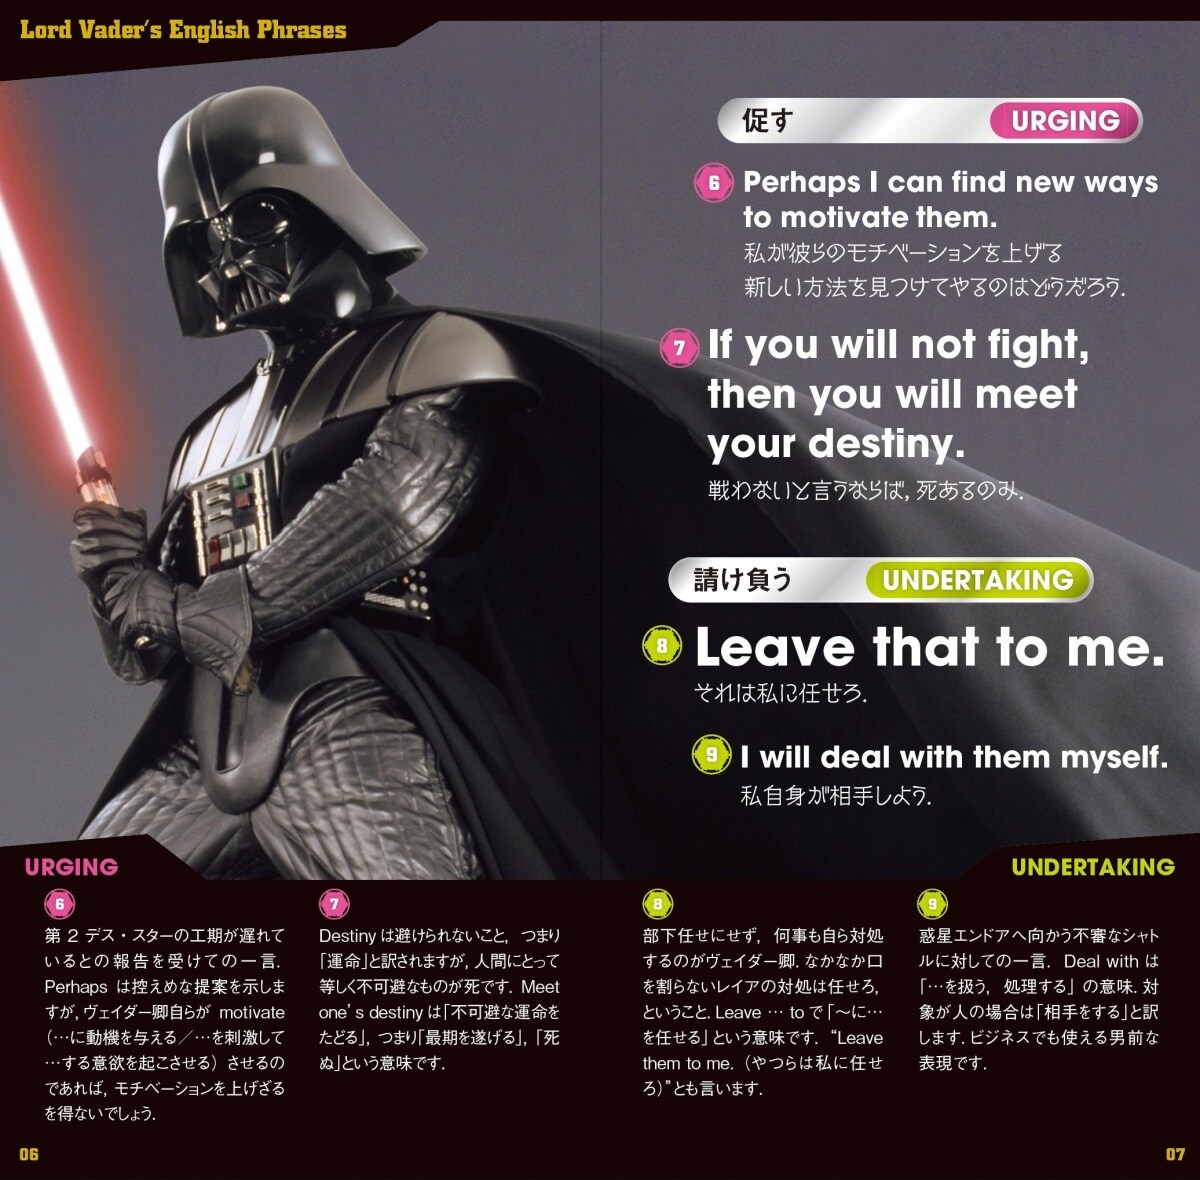 Learn to Speak Like Lord Vader